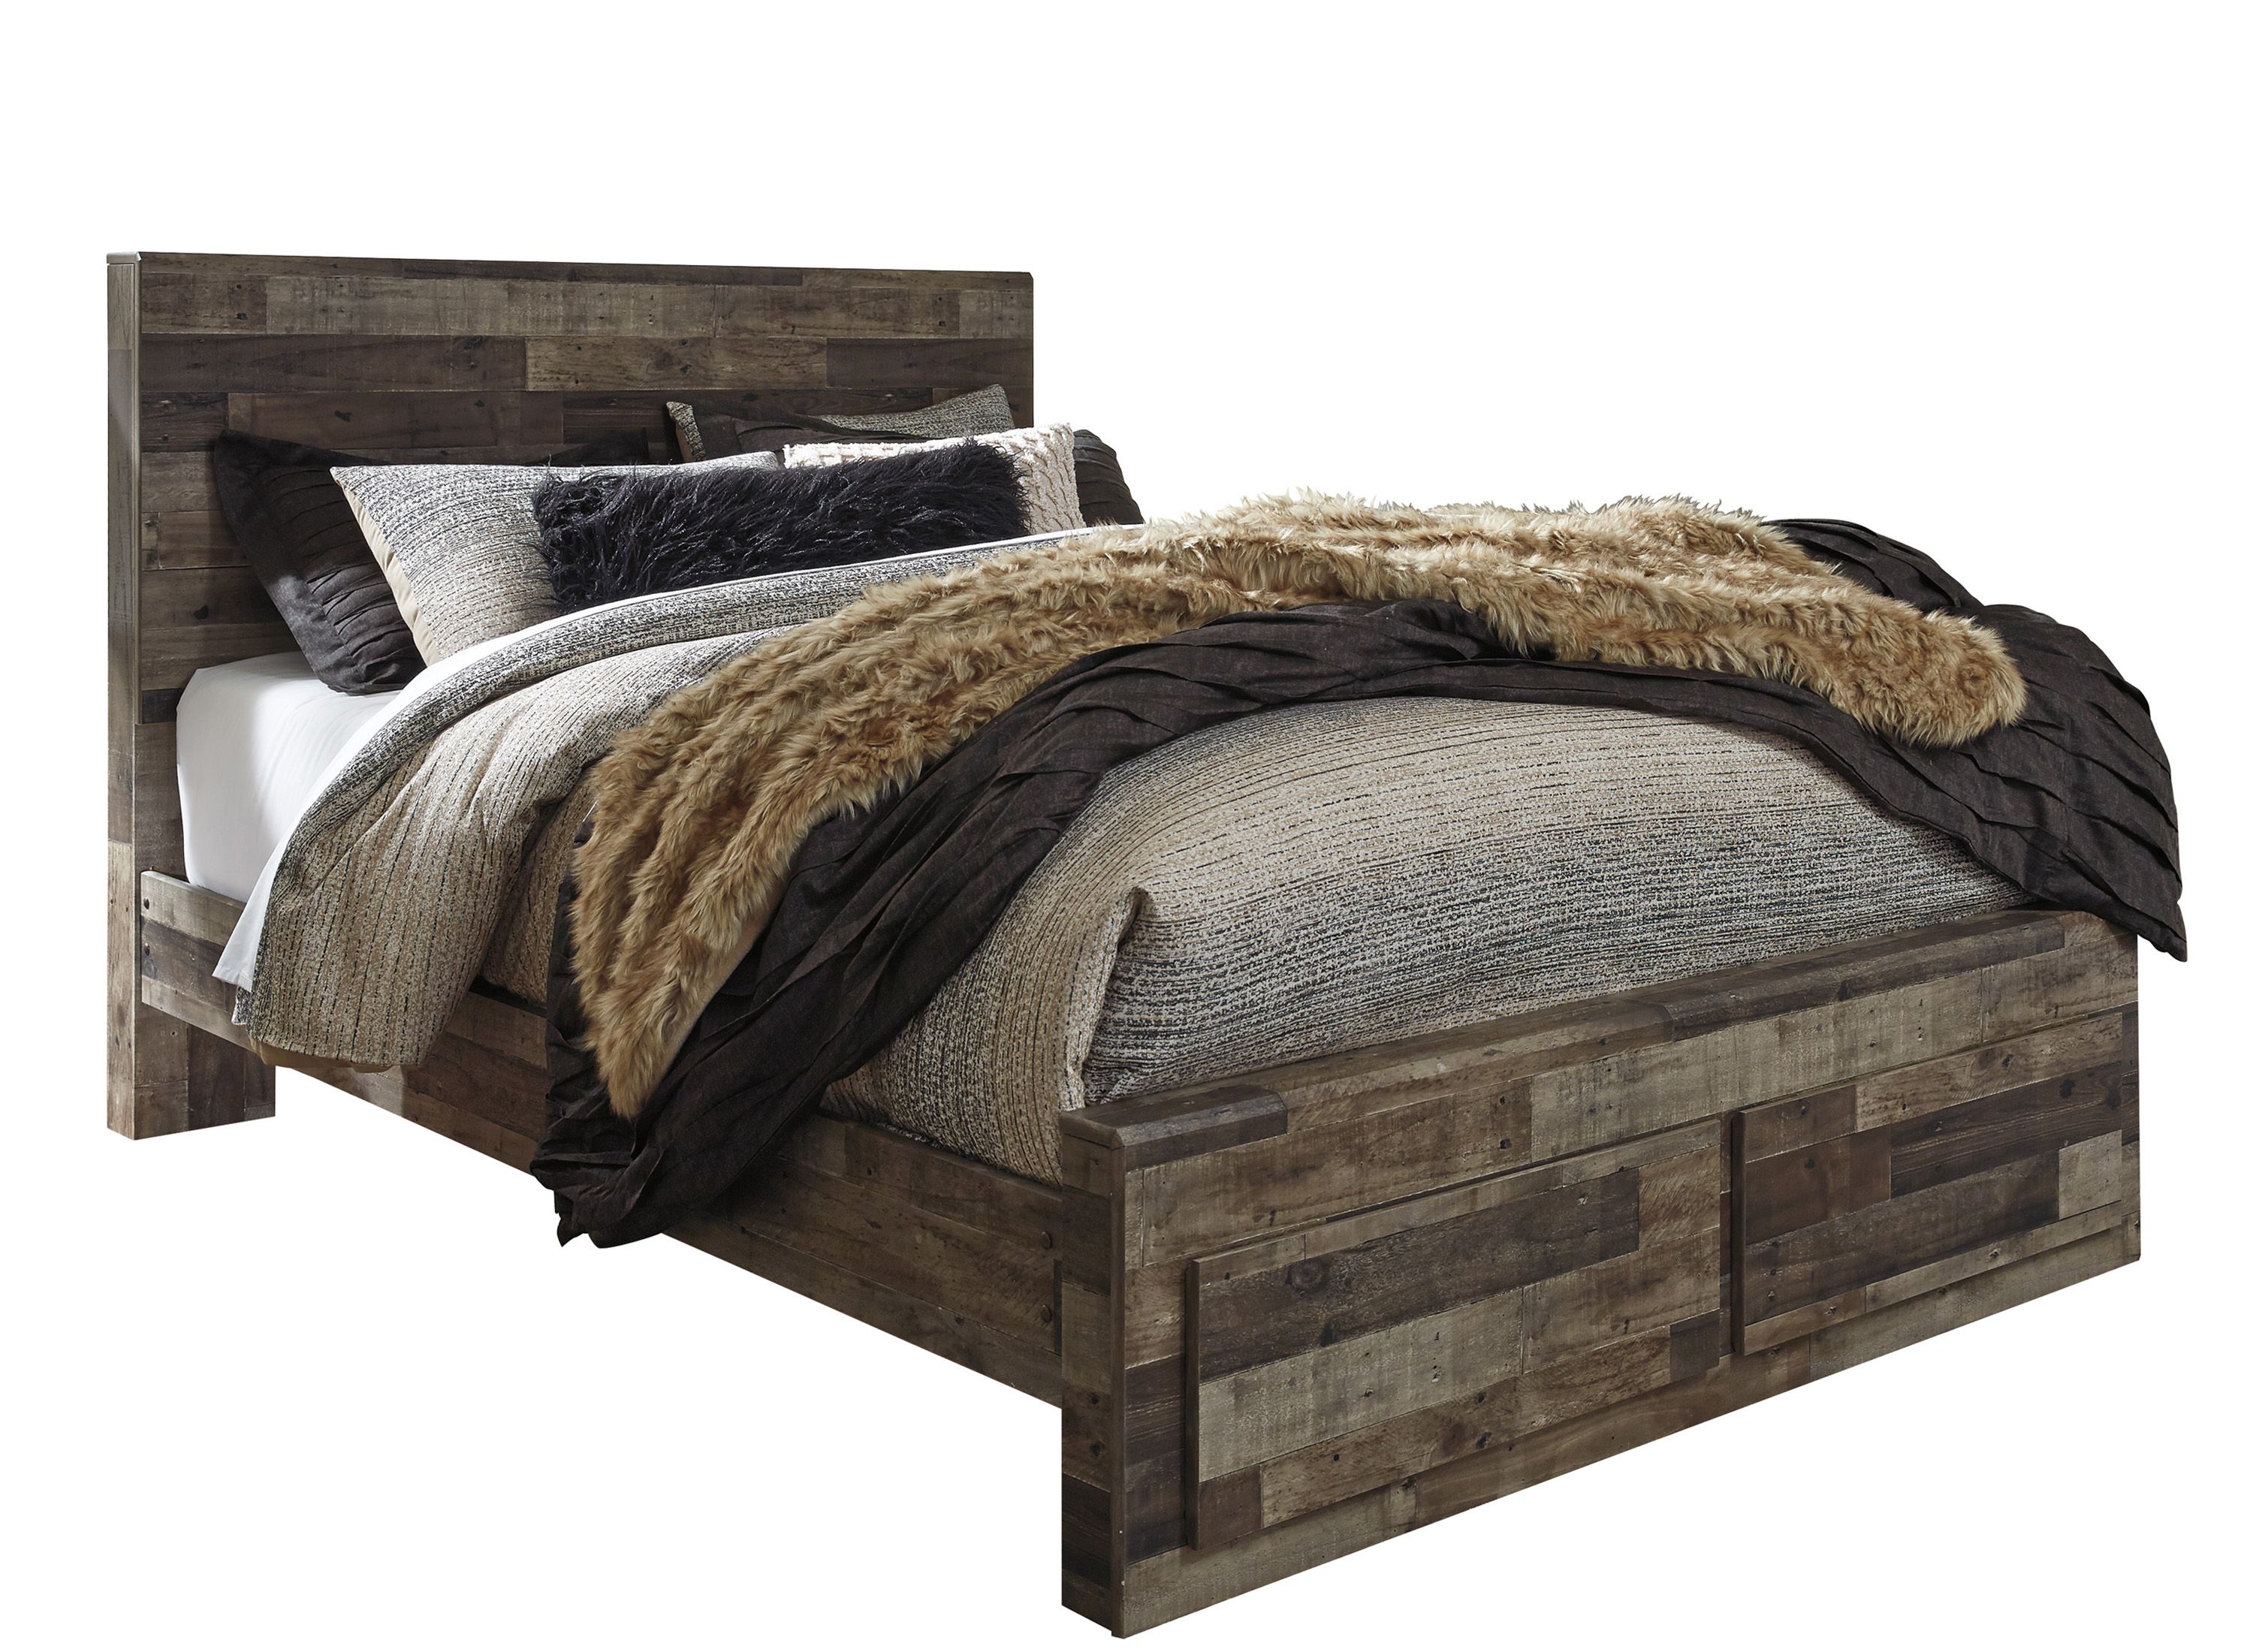 Ainsworth Storage Bed Raymour Flanigan, Queen Bed Frame With Storage Under 3000